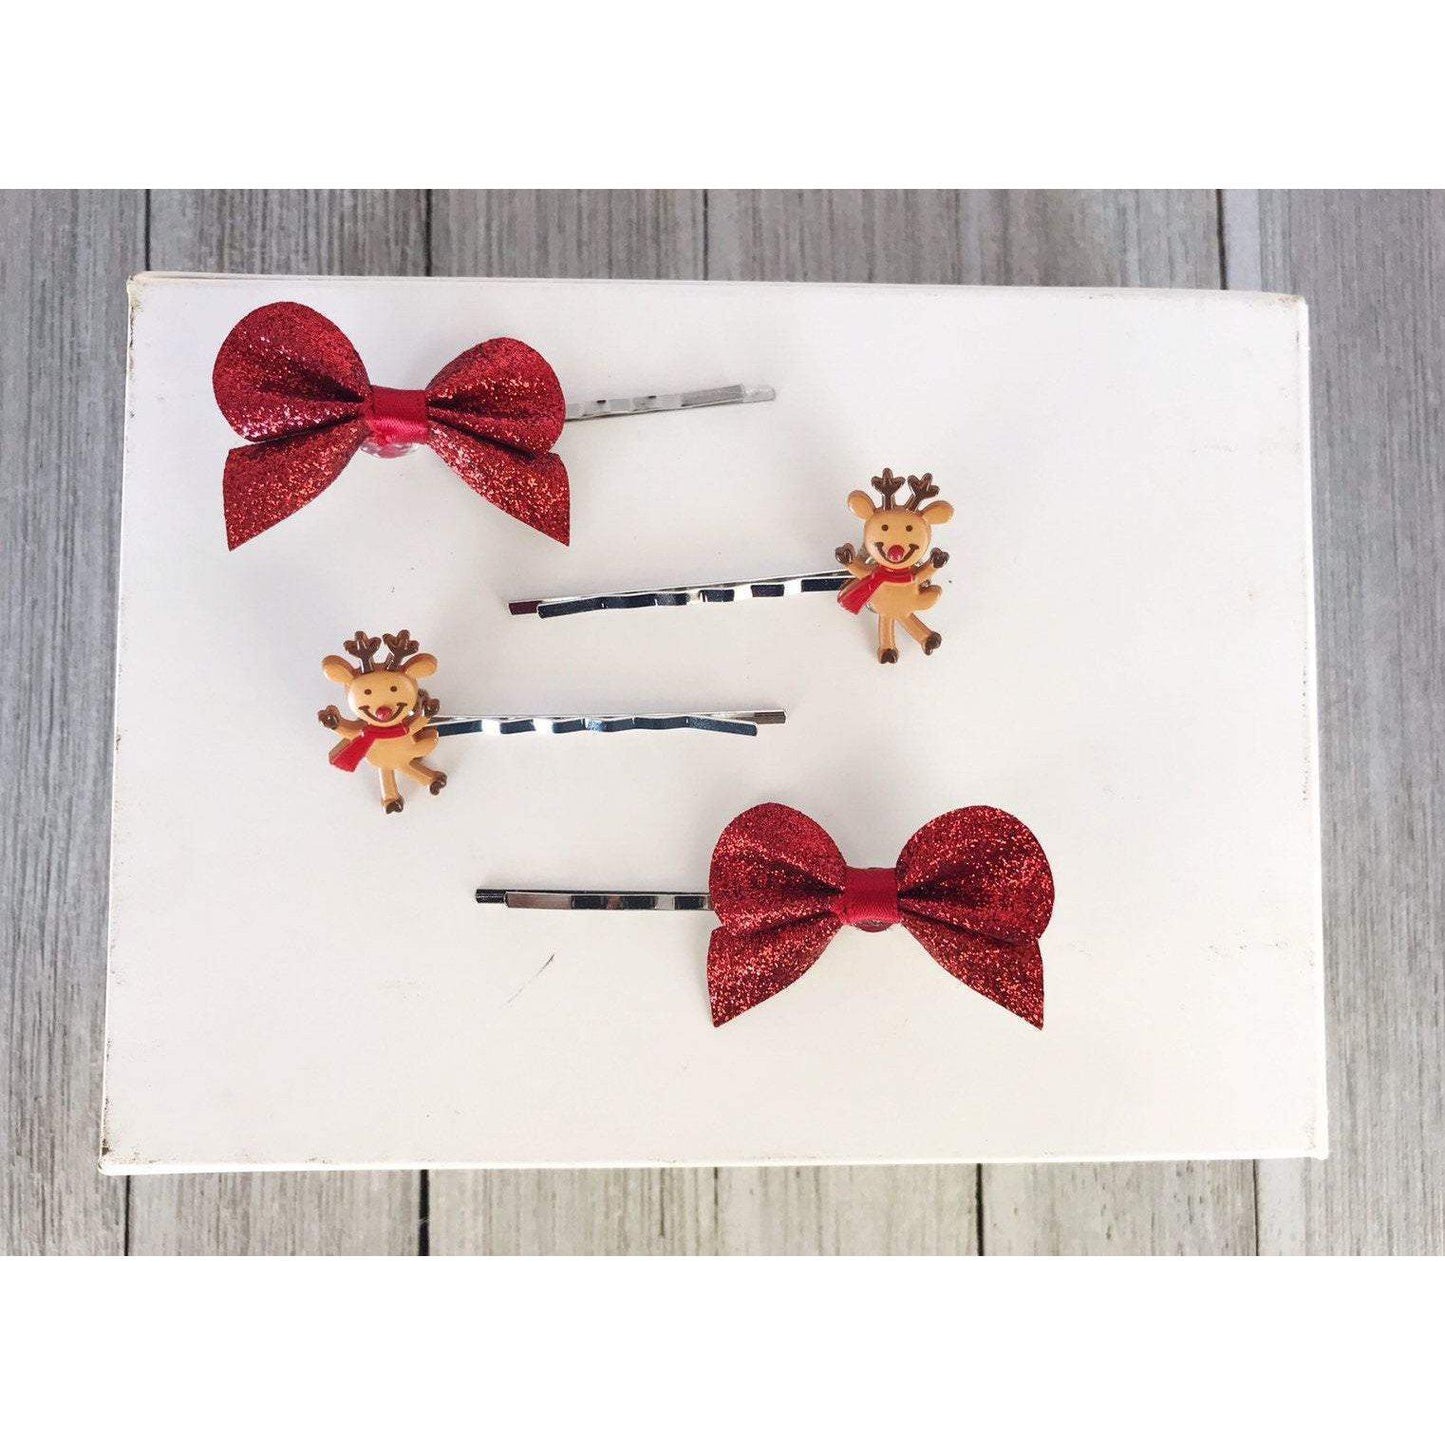 Reindeers & Red Bows Hair Pins - Festive Holiday Accessories